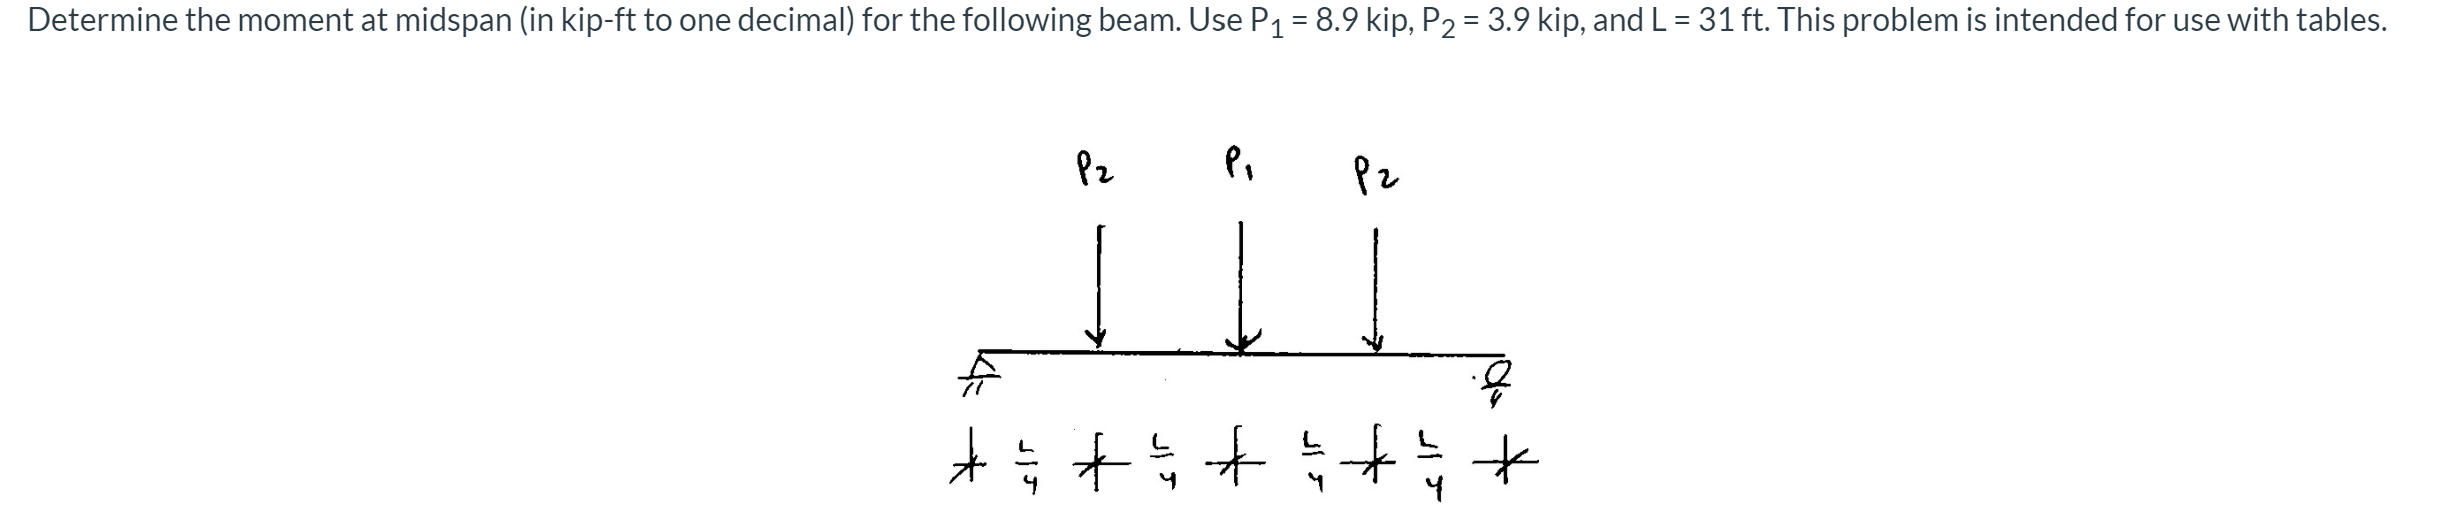 Determine the moment at midspan (in kip-ft to one decimal) for the following beam. Use P1= 8.9 kip, P2 = 3.9 kip, and L = 31 ft. This problem is intended for use with tables.
%3D
Pz
Pz
느
